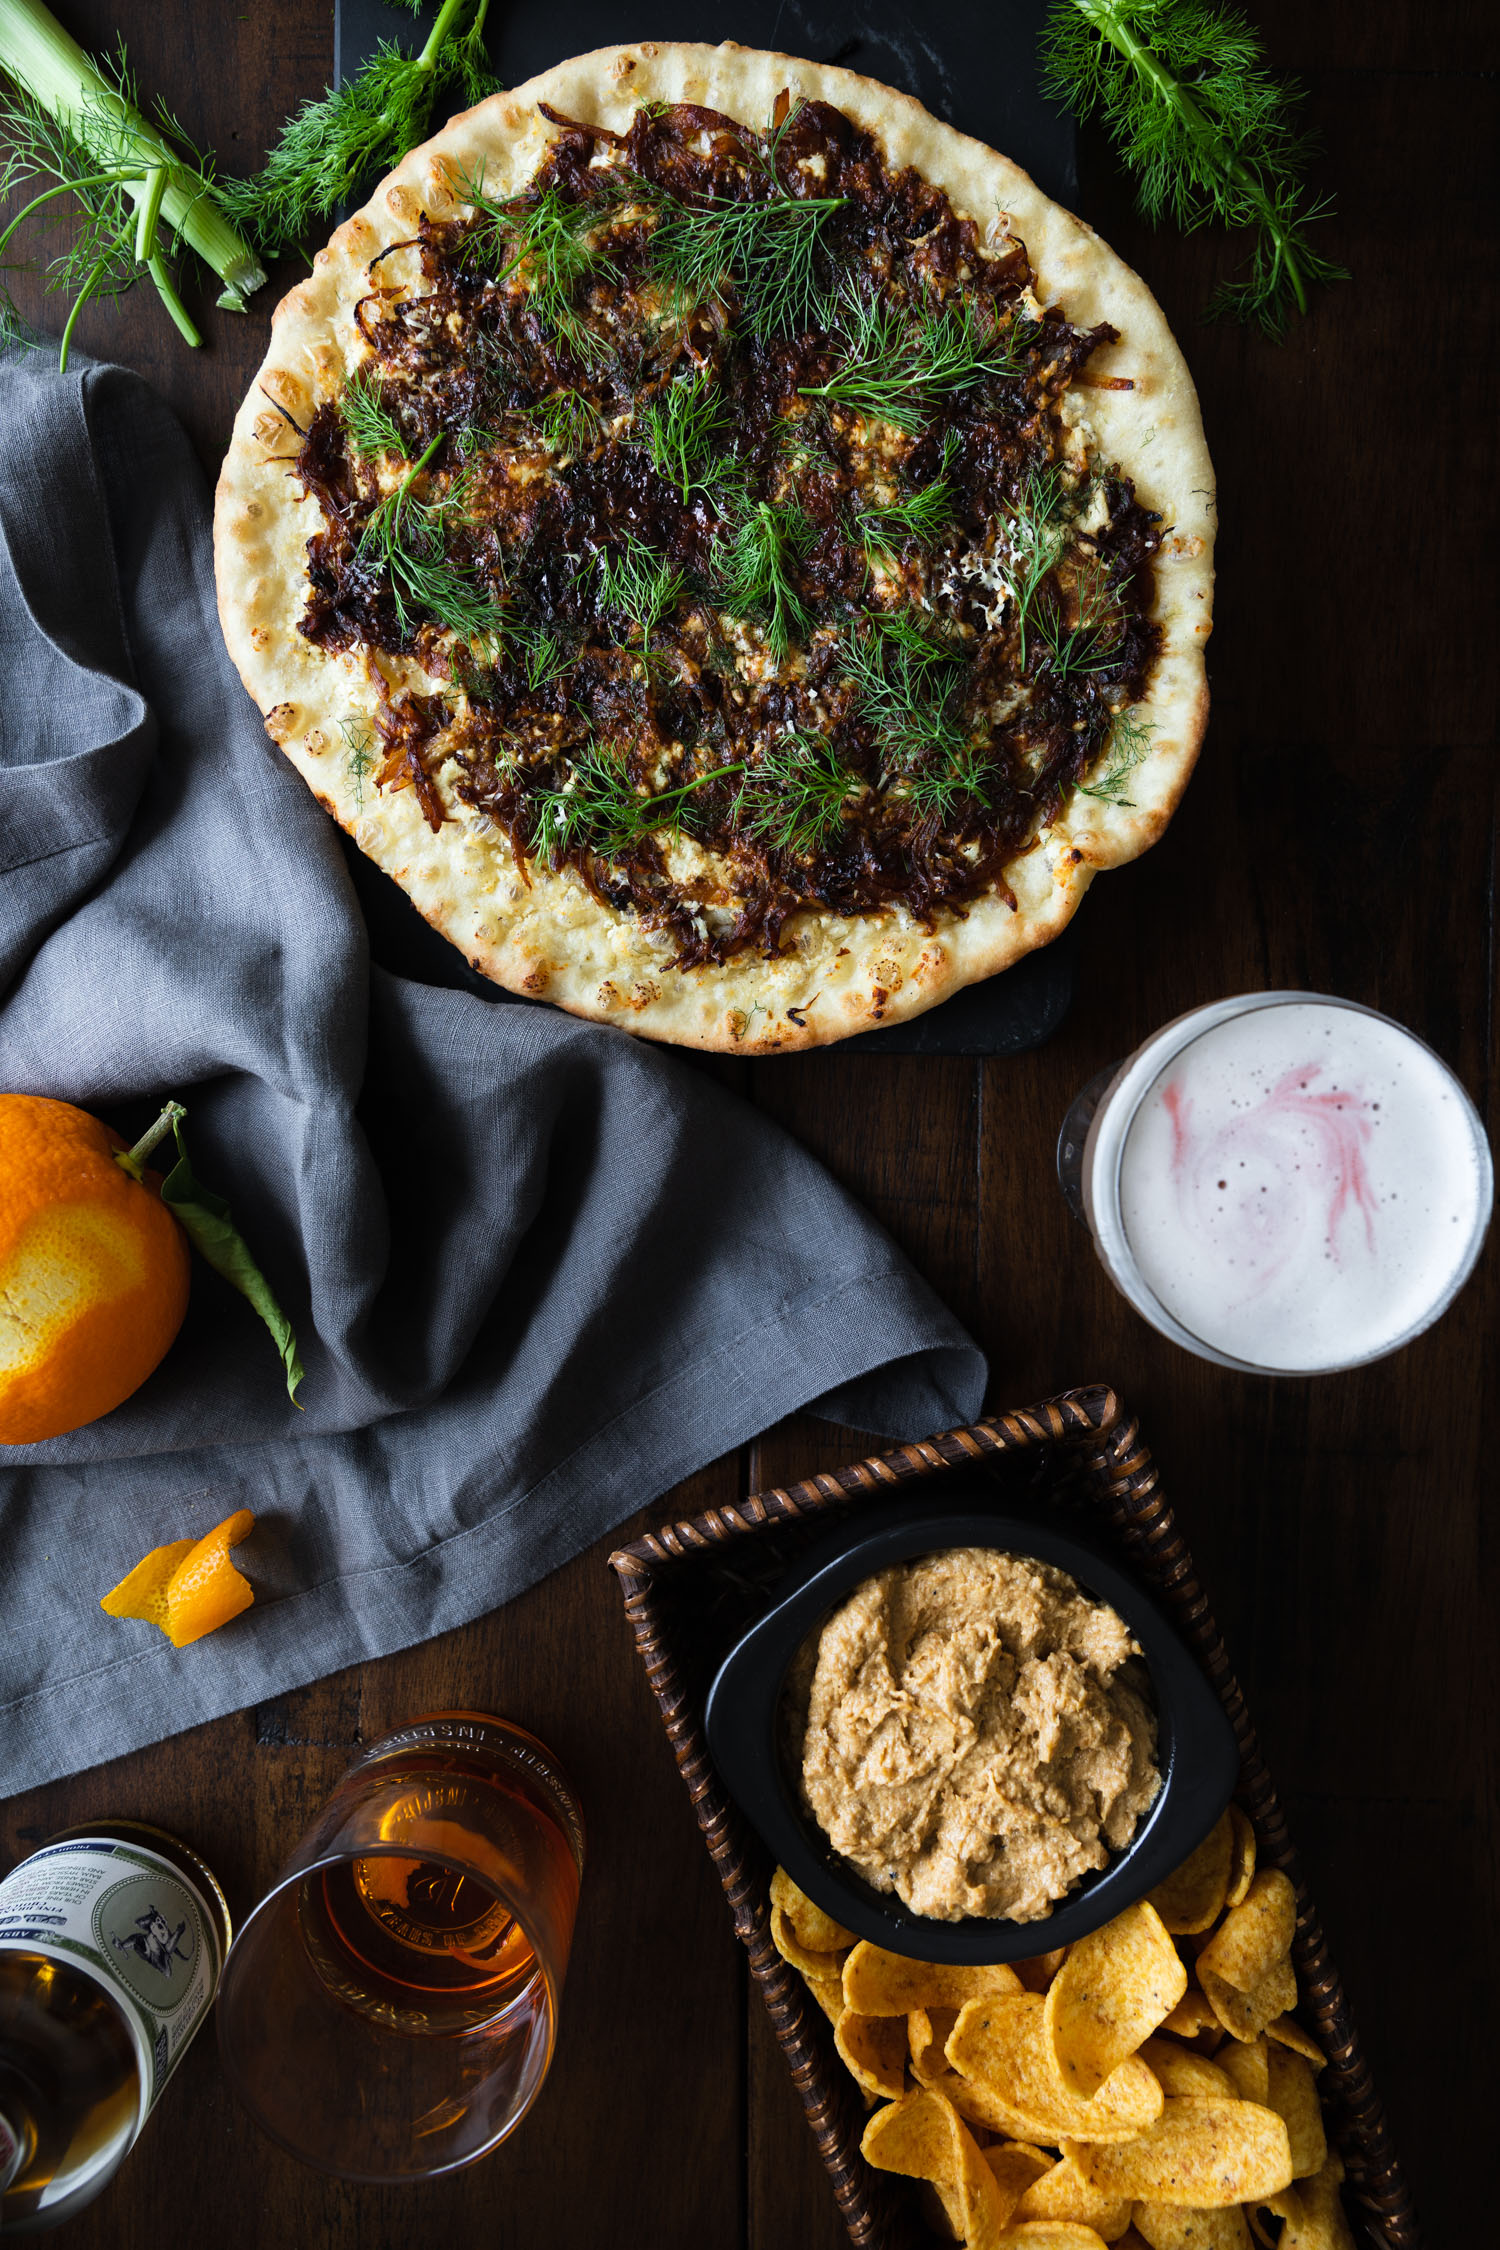 Overhead shot of Caramelized Fennel & Onion Skillet Pizza Recipe surrounded by a cloth napkin, fennel fronds, an orange, drinks, and onion dip.